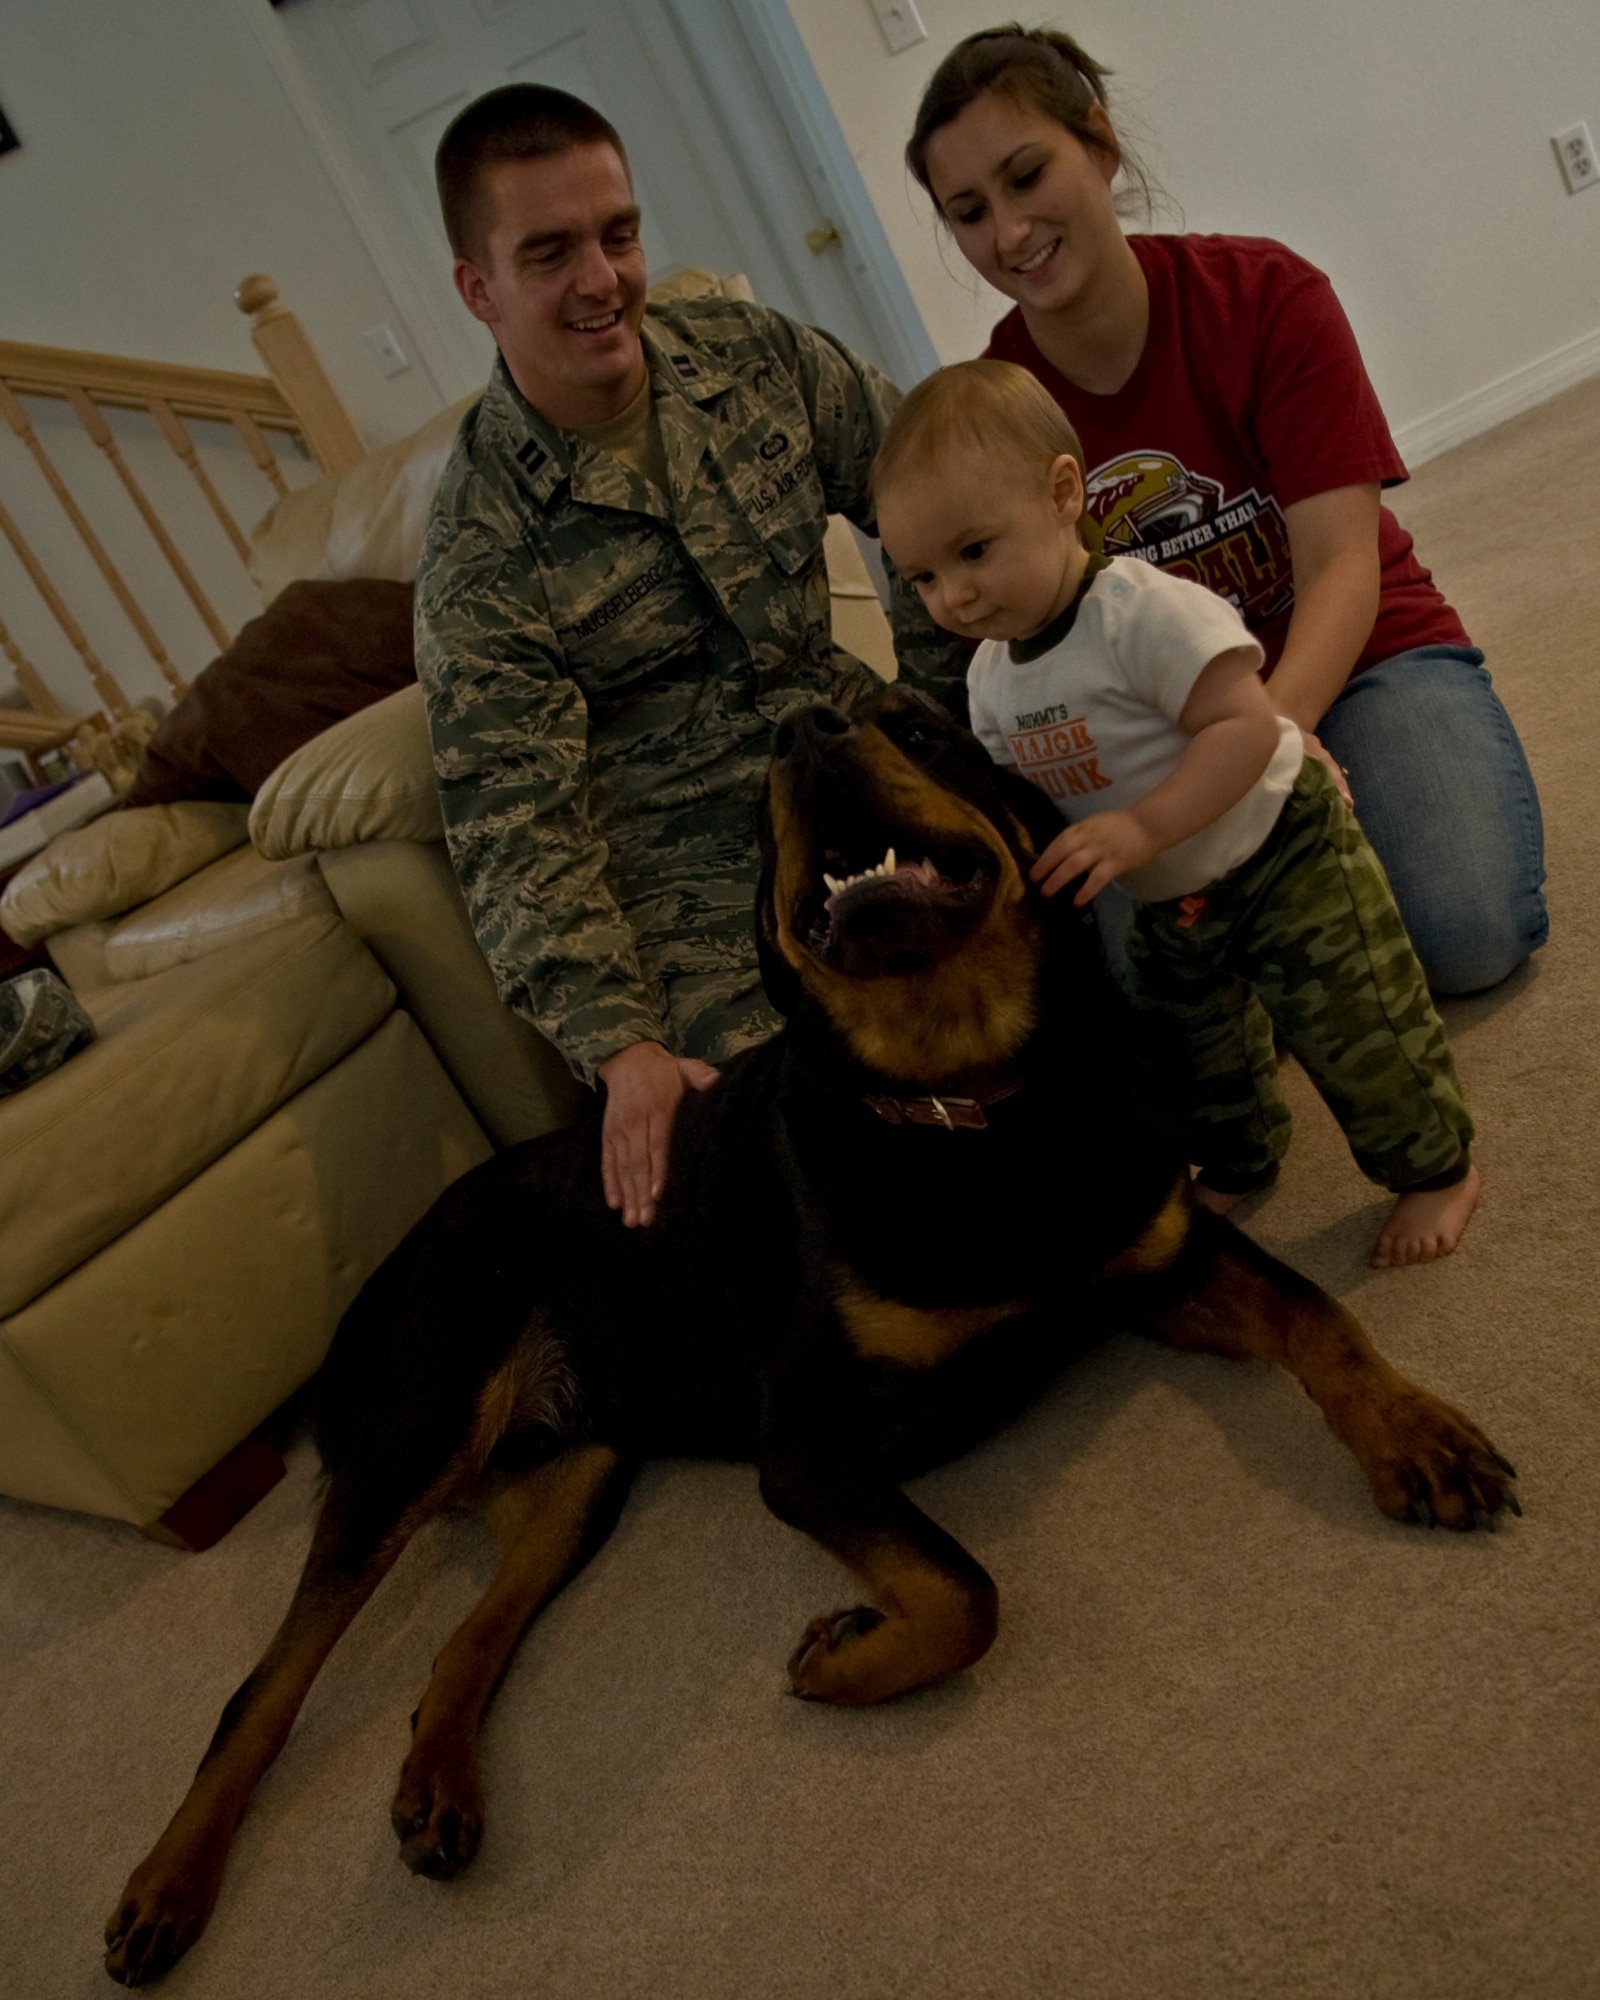 MOUNTAIN HOME AIR FORCE BASE, Idaho – The 366th Operation Support Squadron’s Weather Flight Commander, Capt. Daniel Muggelberg, his wife, Crystal, and son, James, play in the living room of their base house with Muggsy, a 130-pound Rottweiler.  Rottweiler’s are one of the breeds of dogs deemed “aggressive or potentially aggressive” under a new Air Force policy, and are now prohibited on base.    (U.S. Air Force photo by Staff Sgt. Roy Lynch III)